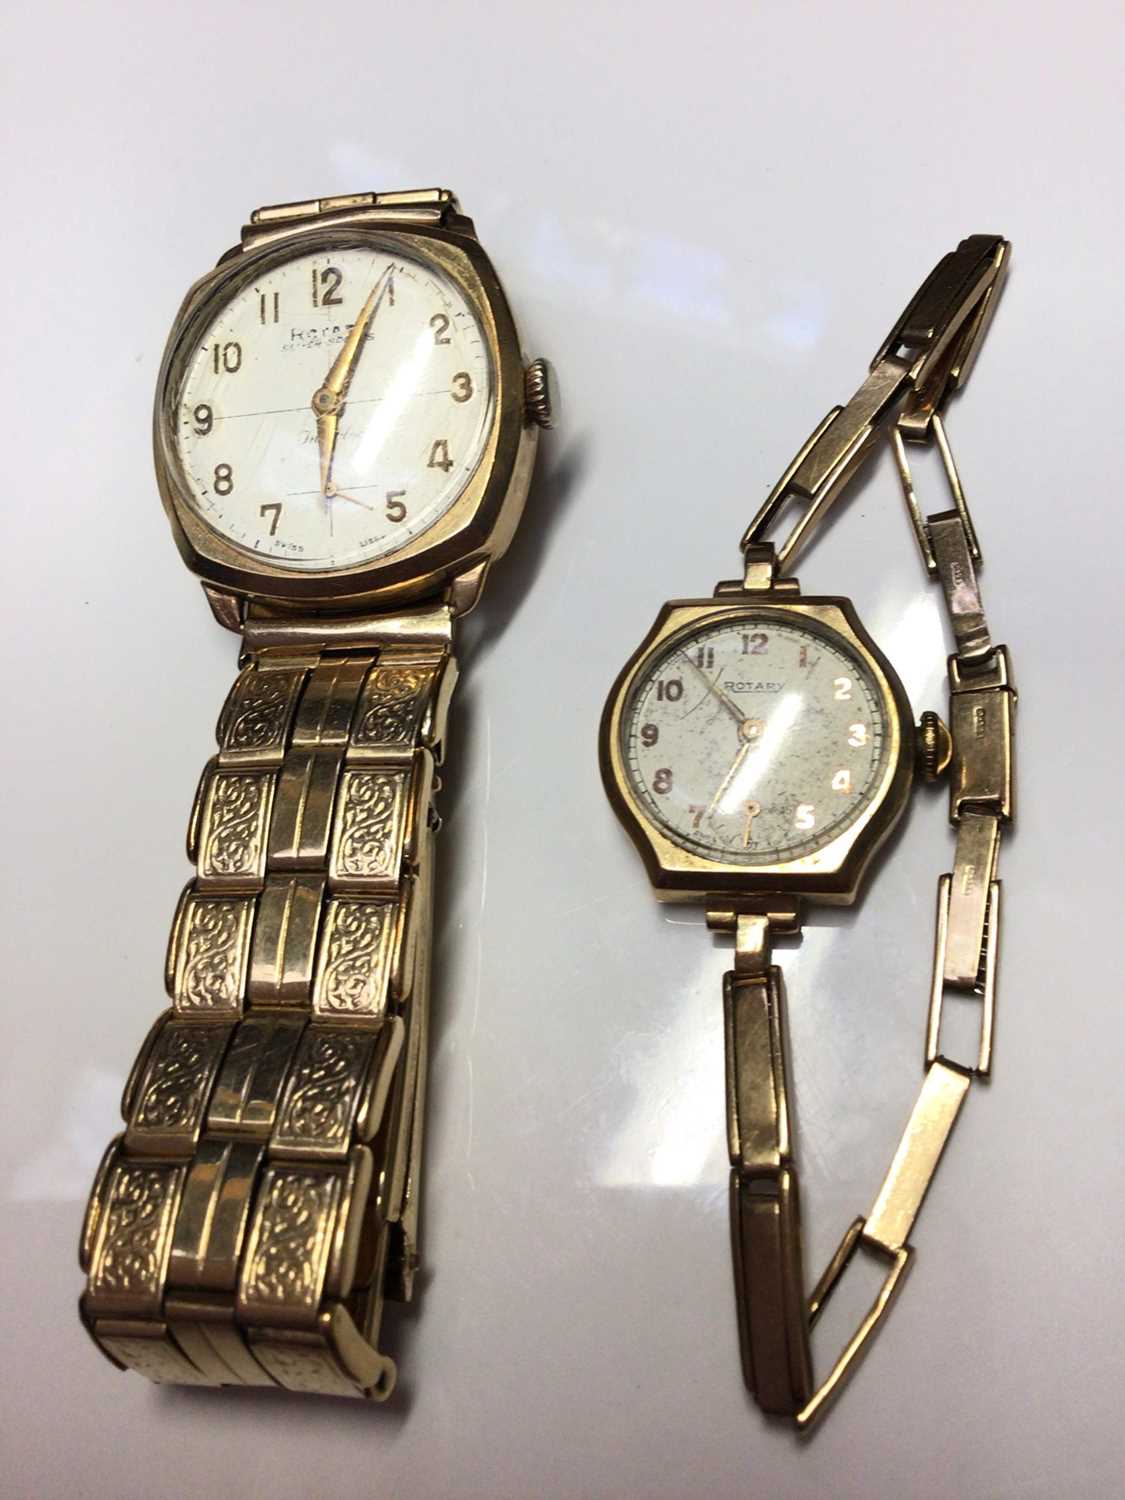 Lot 57 - 9ct gold cased Rotary Super-Sports wristwatch on plated bracelet and 9ct gold ladies Rotary wristwatch on 9ct gold bracelet